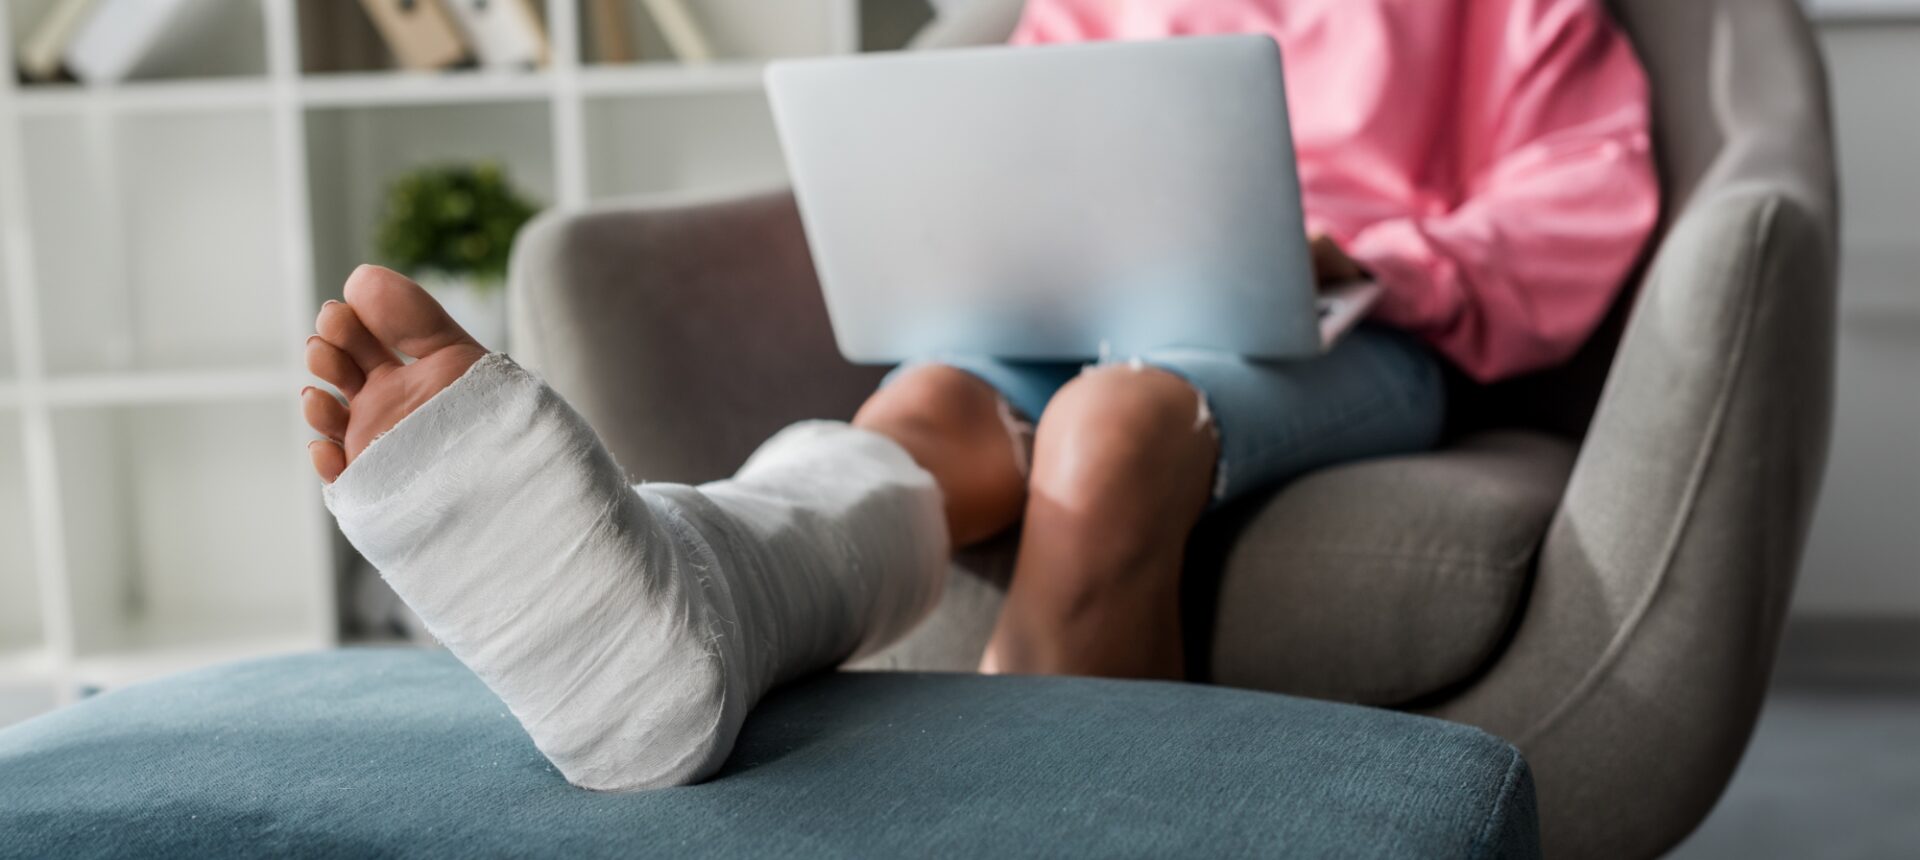 A person sitting on the couch with their foot propped up and in a cast from a leg injury